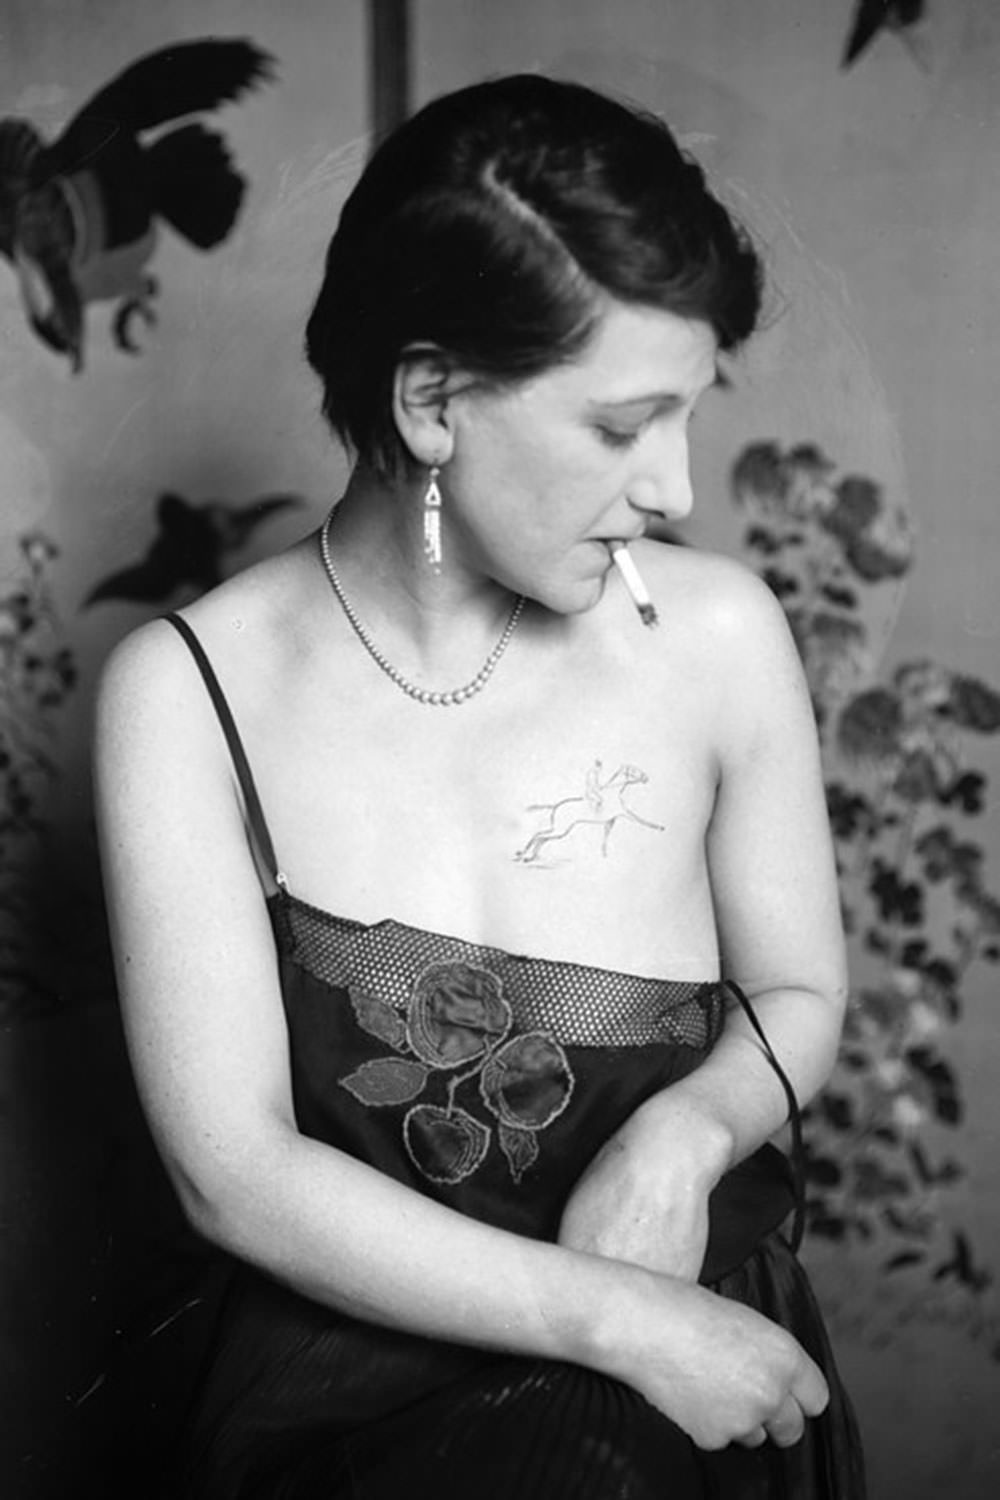 A young woman shows off her chest tattoo of a horse and jockey in 1930.